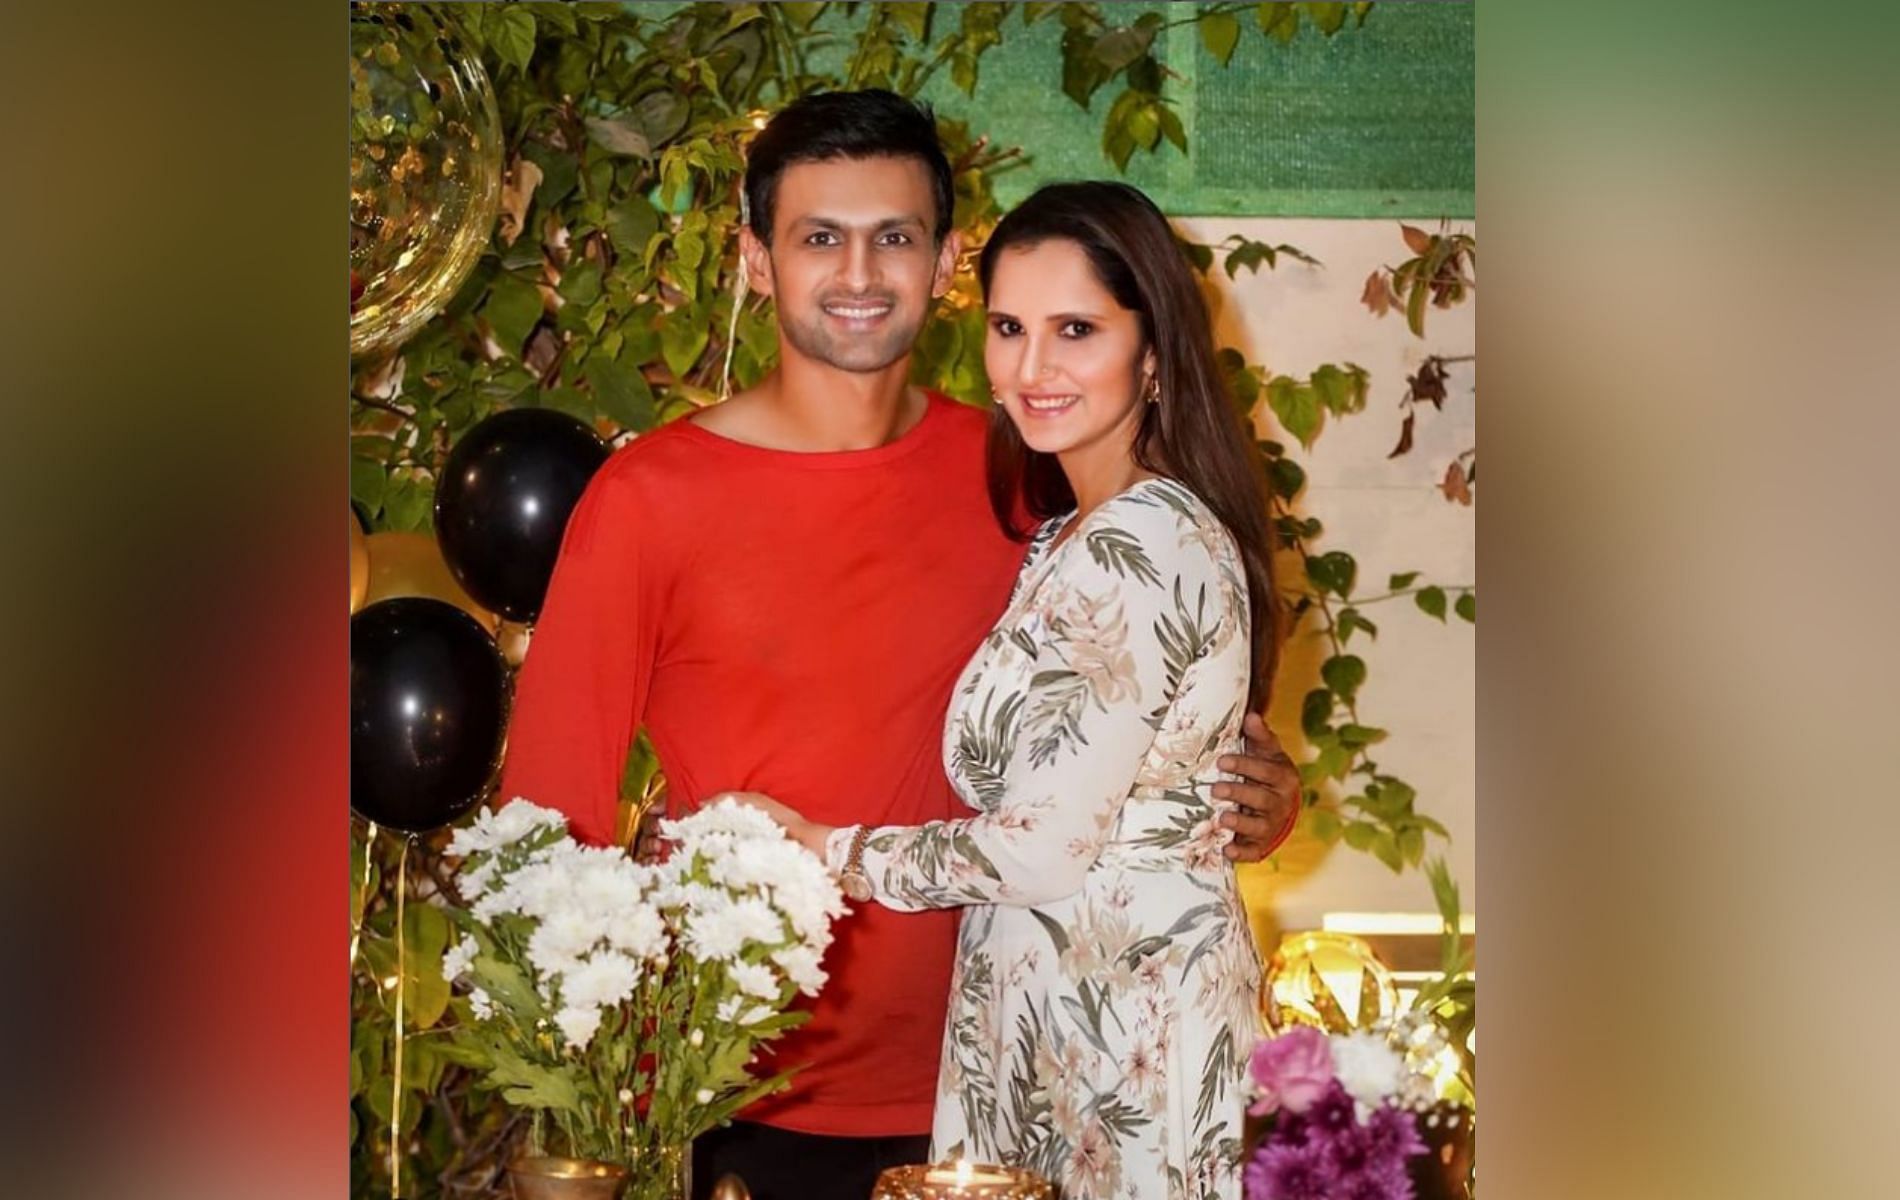 Sania Mirza and Shoaib Malik have been married for 11 years and more now.